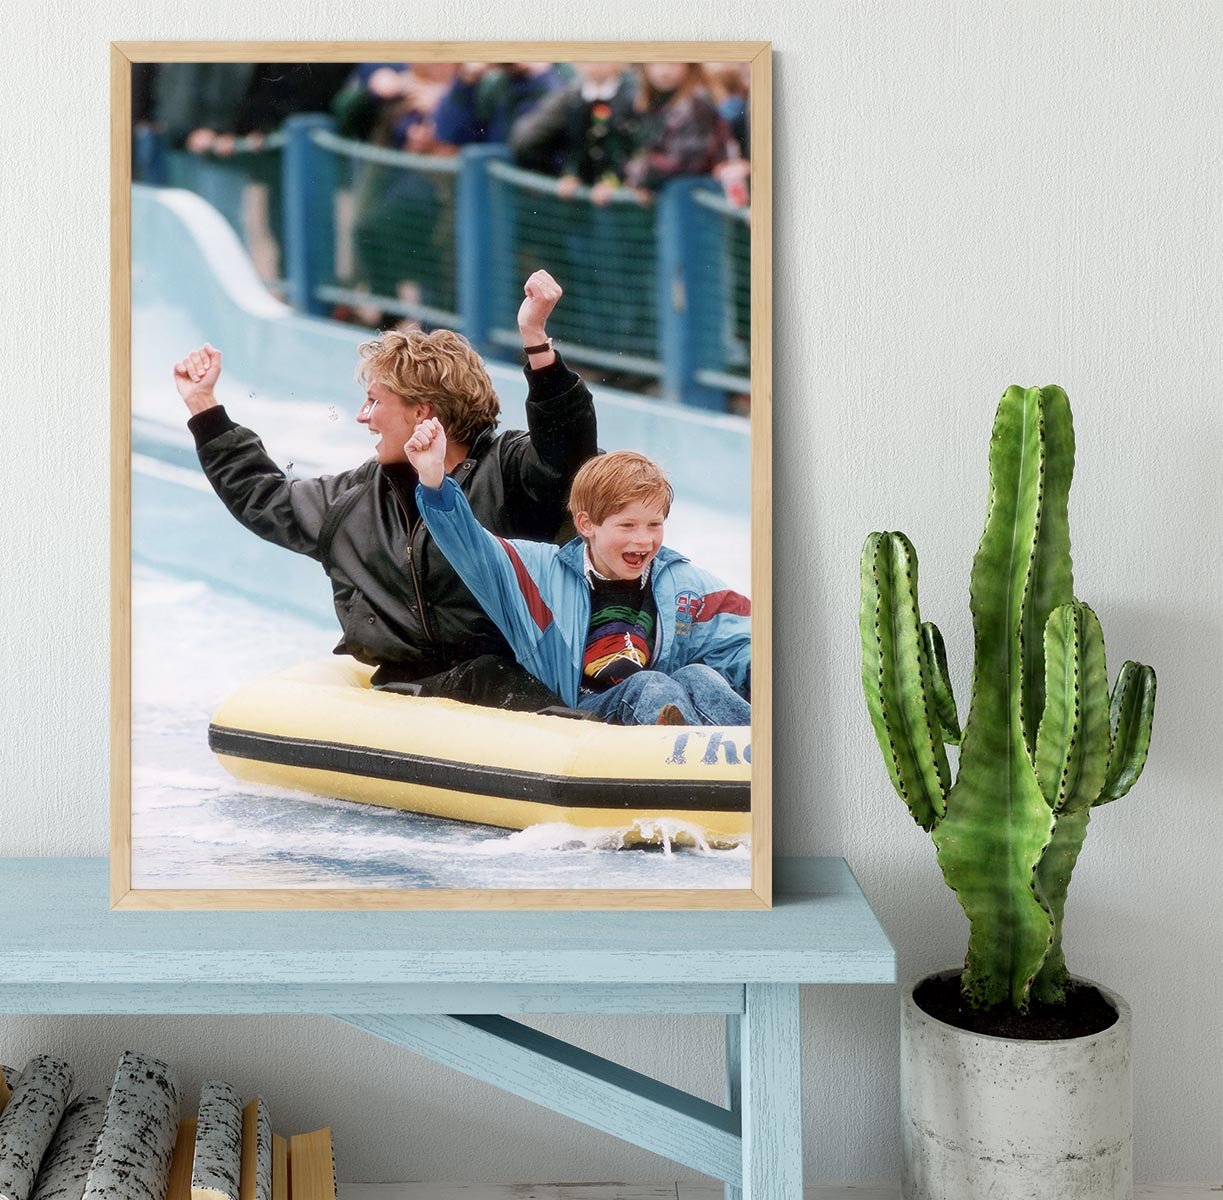 Princess Diana with Prince Harry on a water ride Framed Print - Canvas Art Rocks - 4